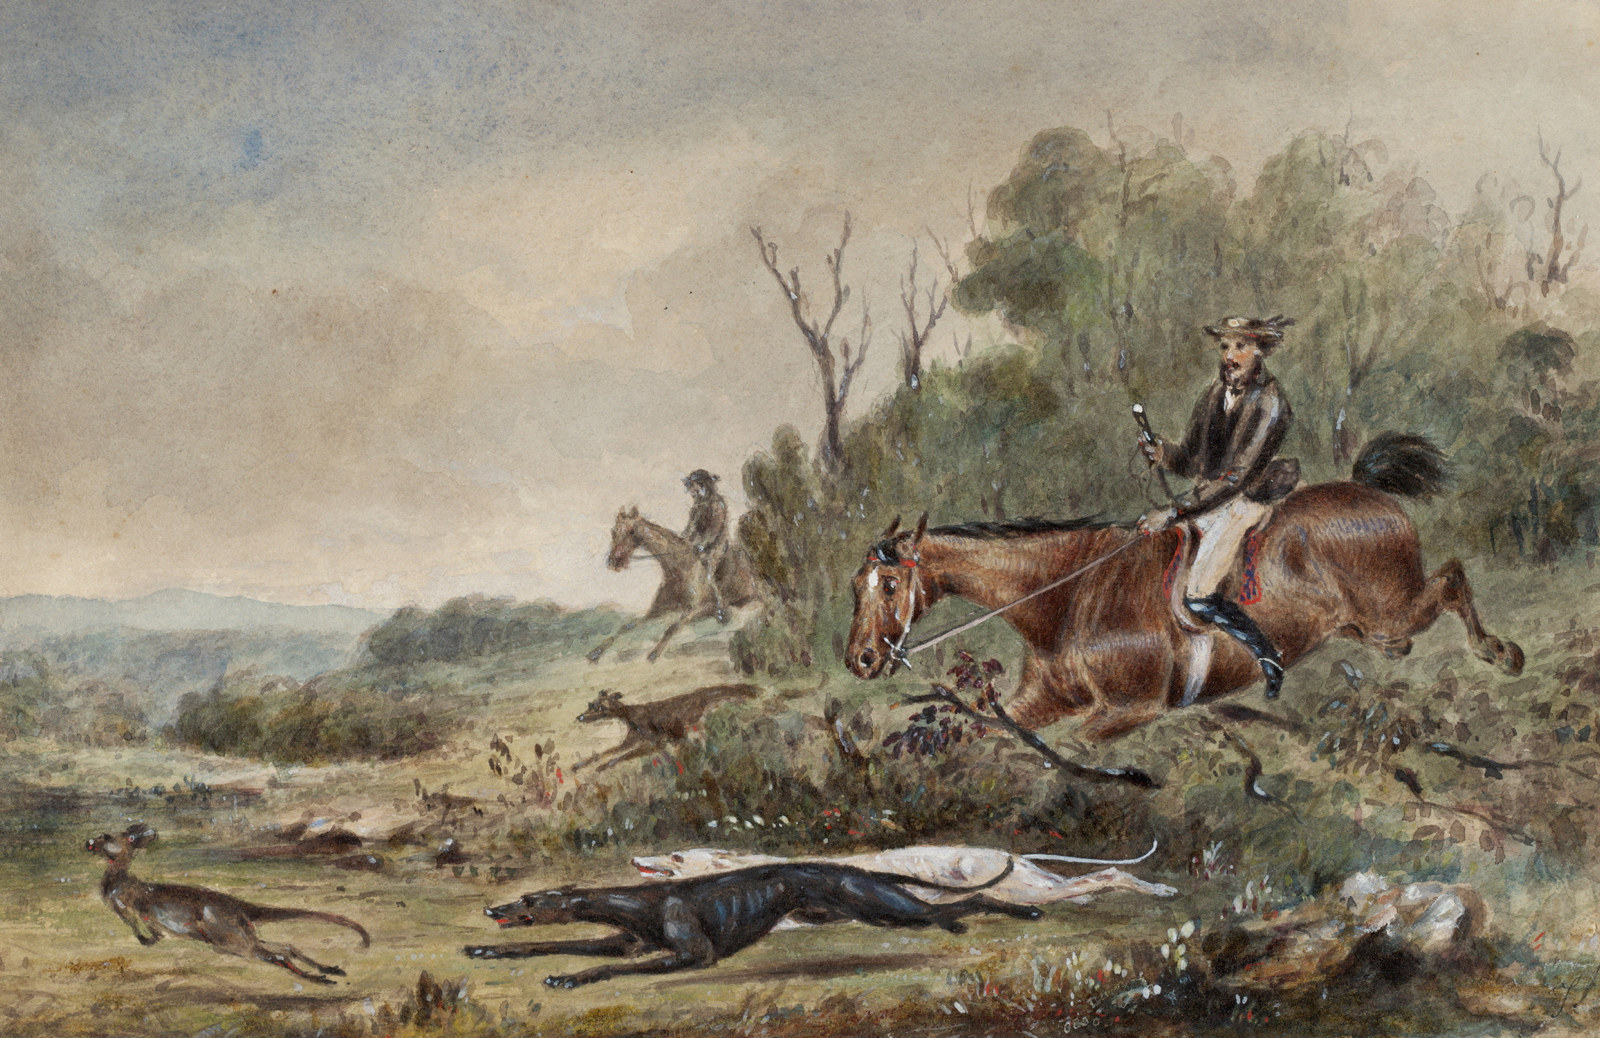 Men on horseback with hounds pursuing kangaroo to left of painting.